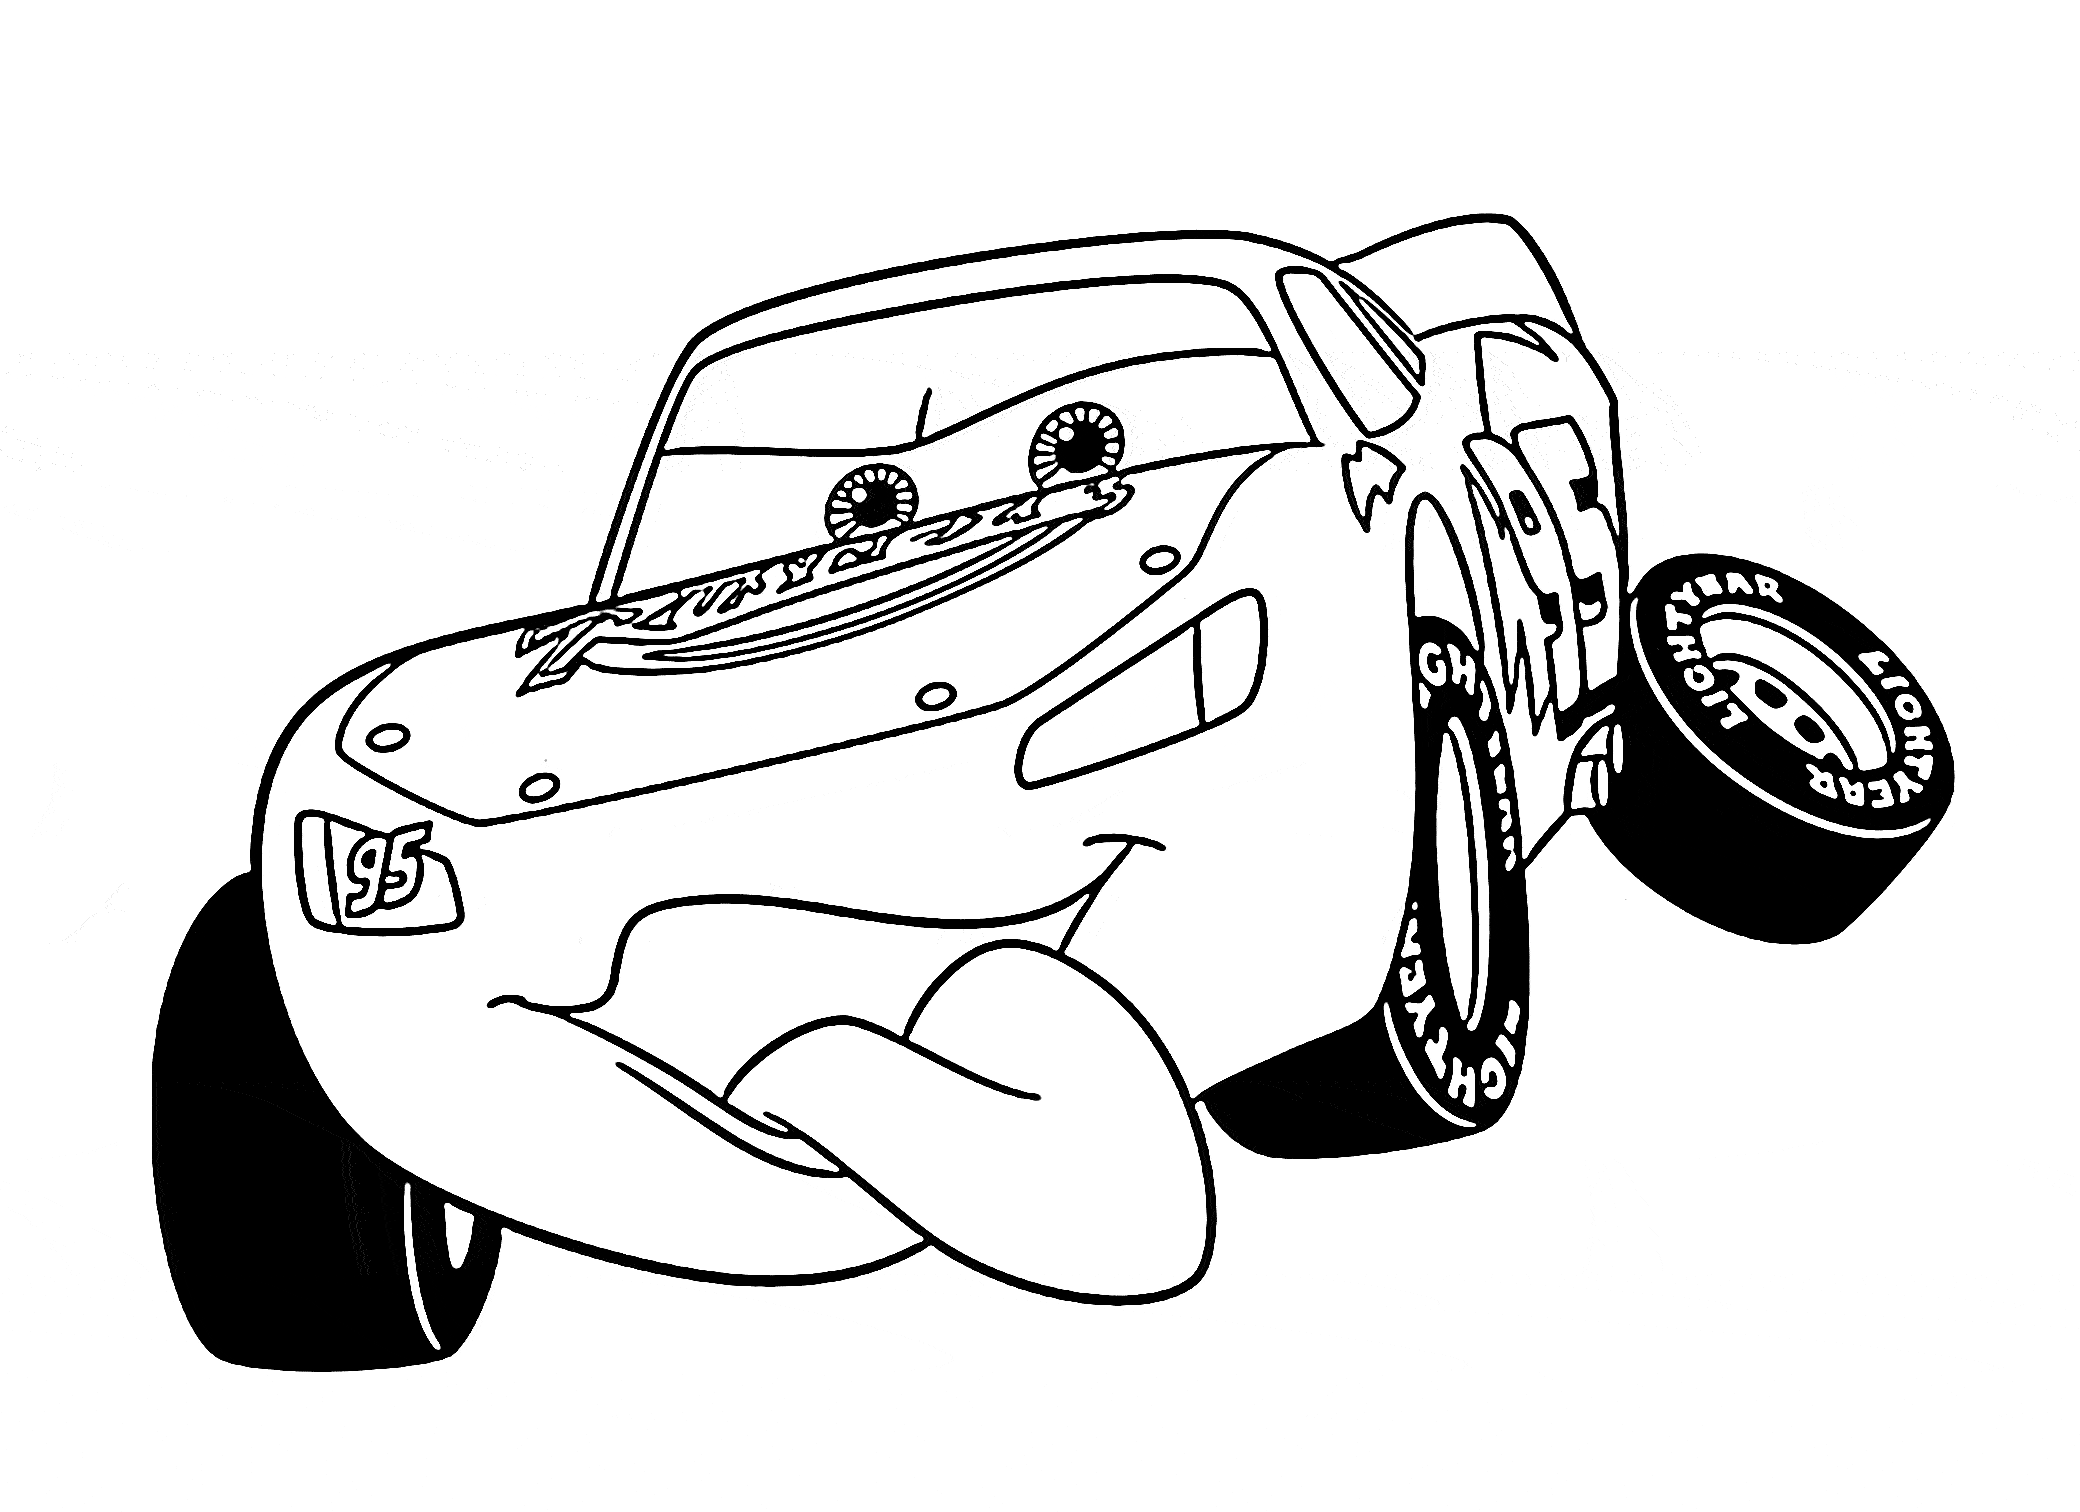 Funny Lightning McQueen - Cars coloring page for kids, disney ...